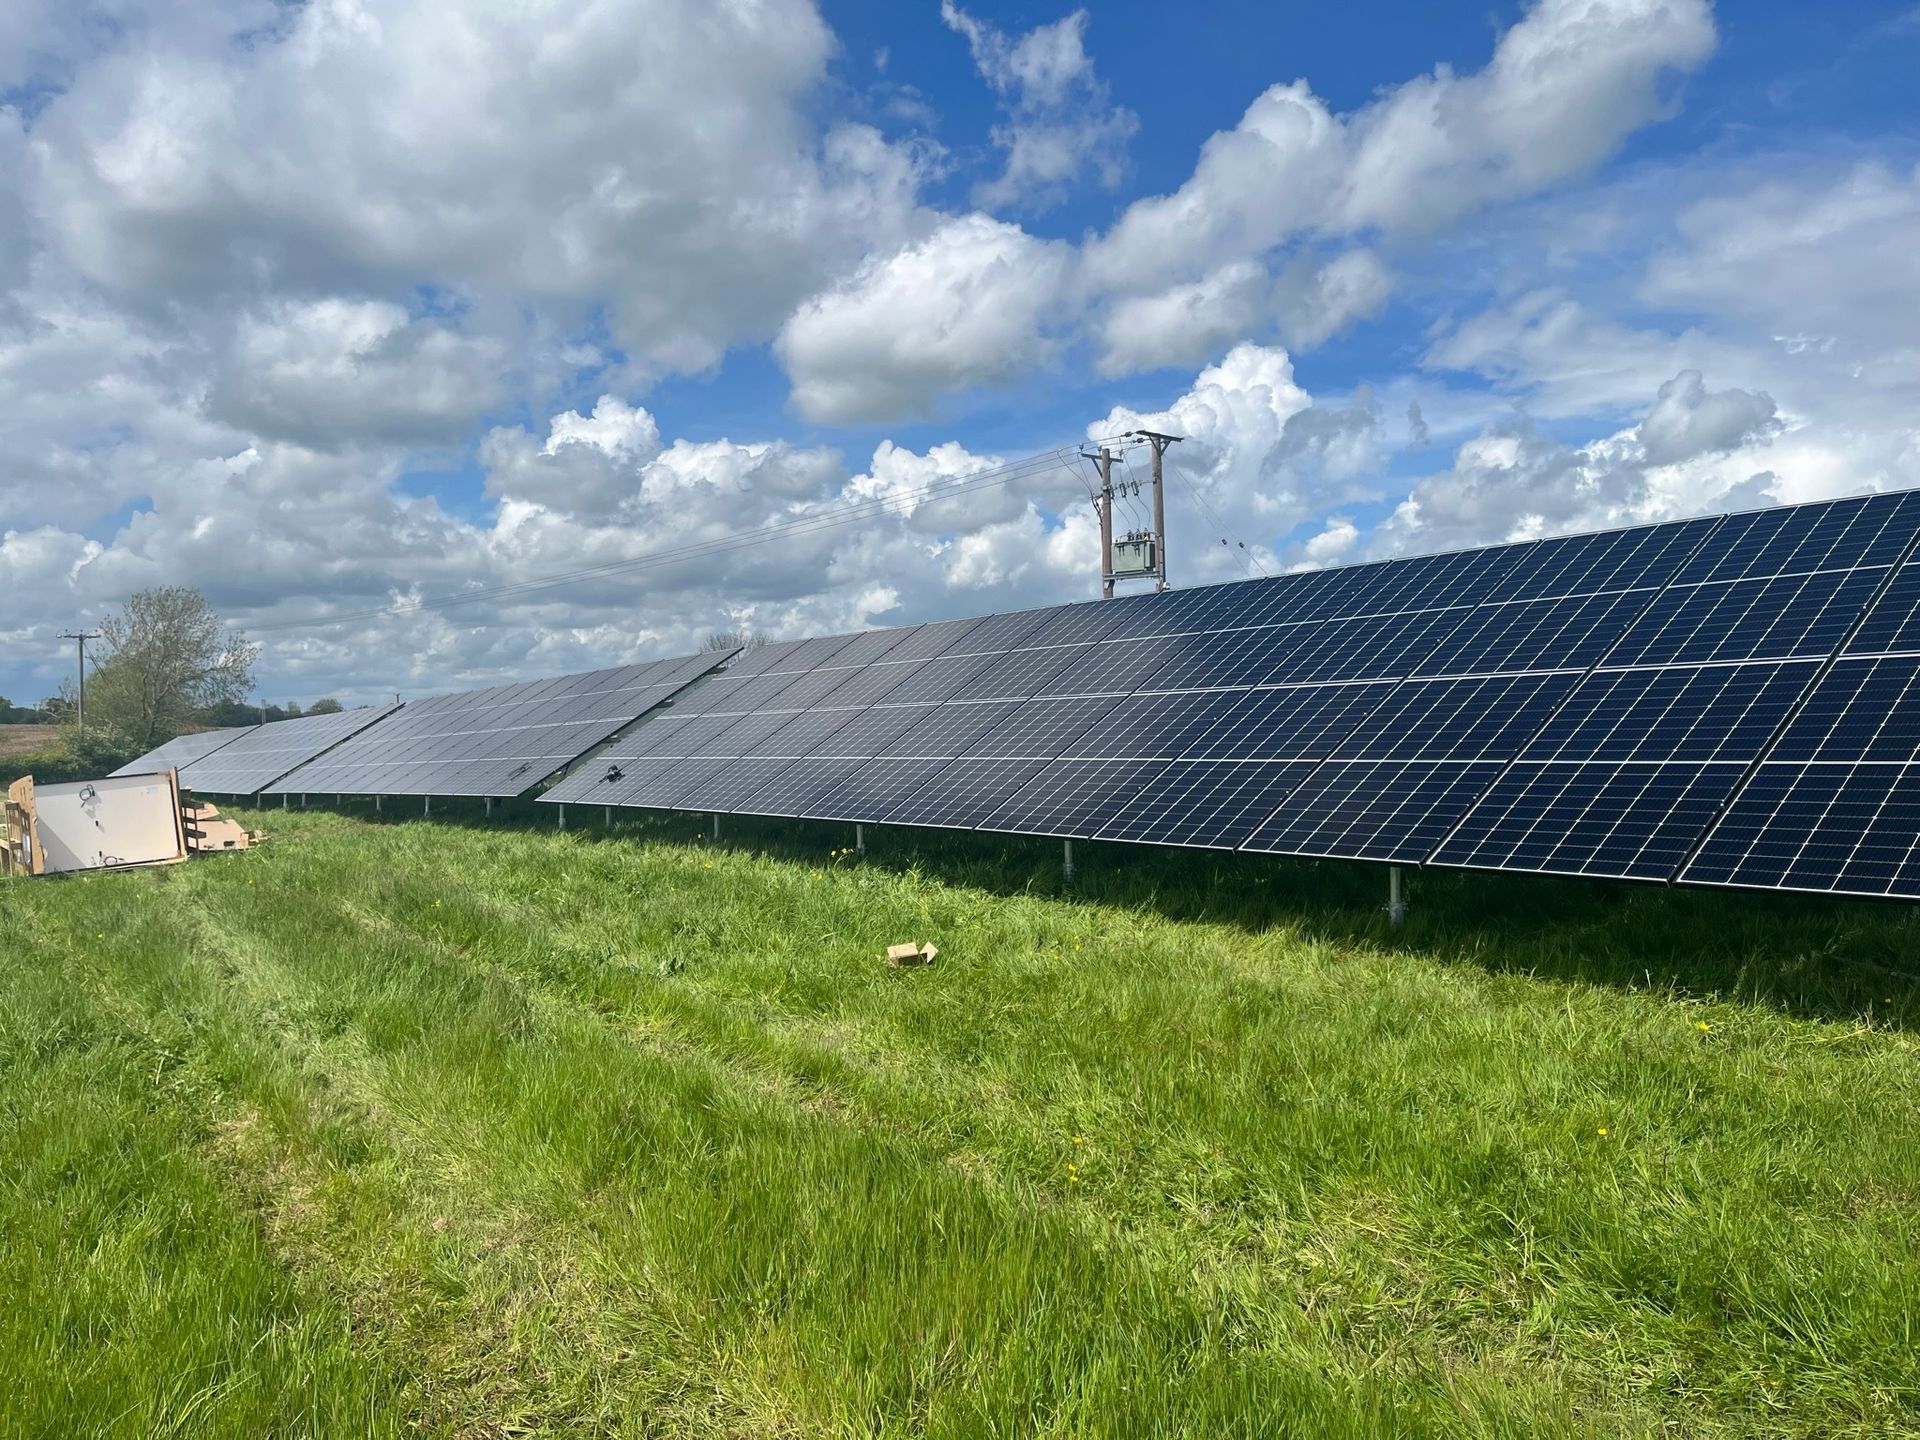 A row of solar panels in a grassy field